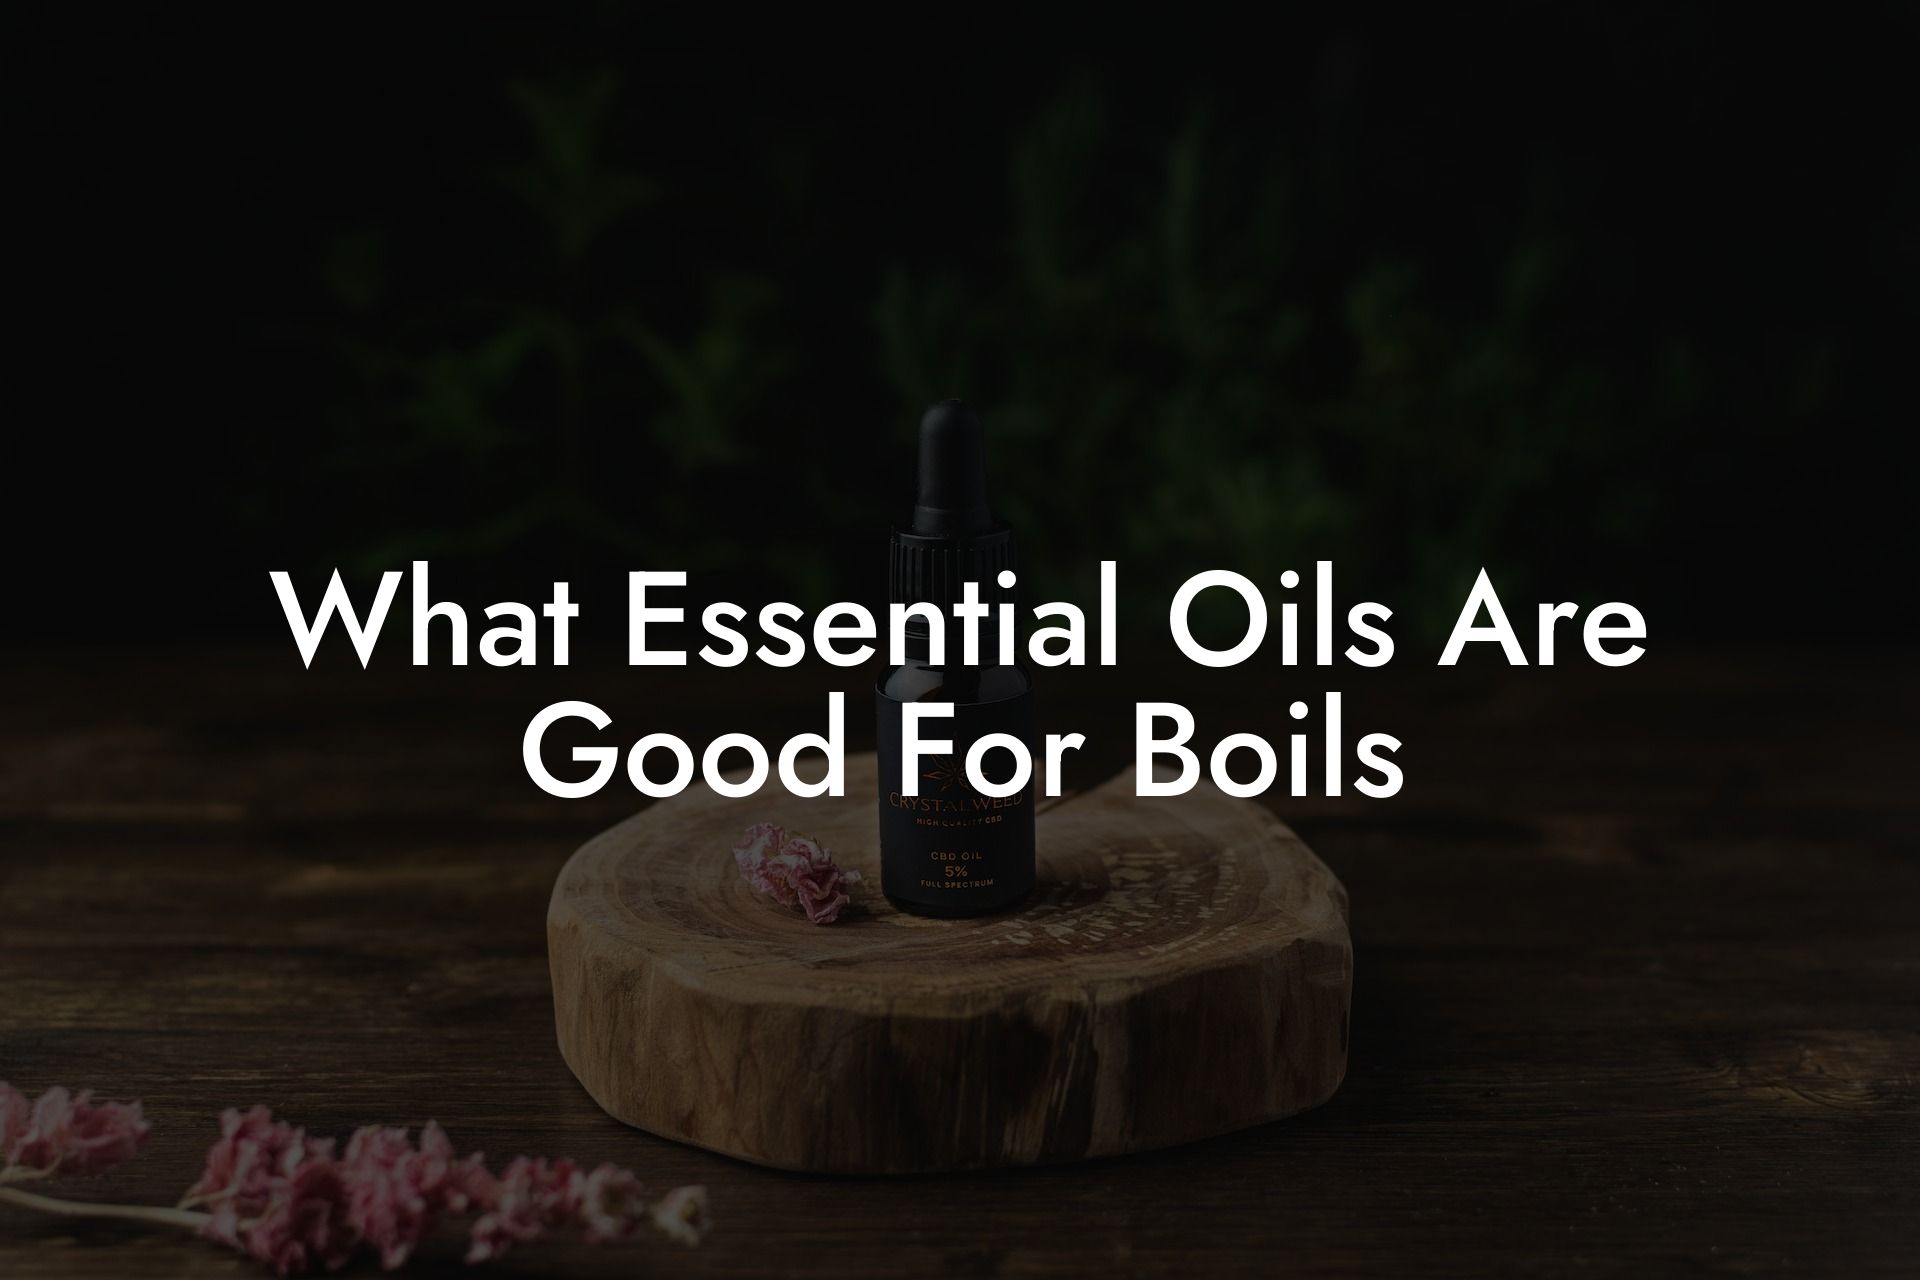 What Essential Oils Are Good For Boils